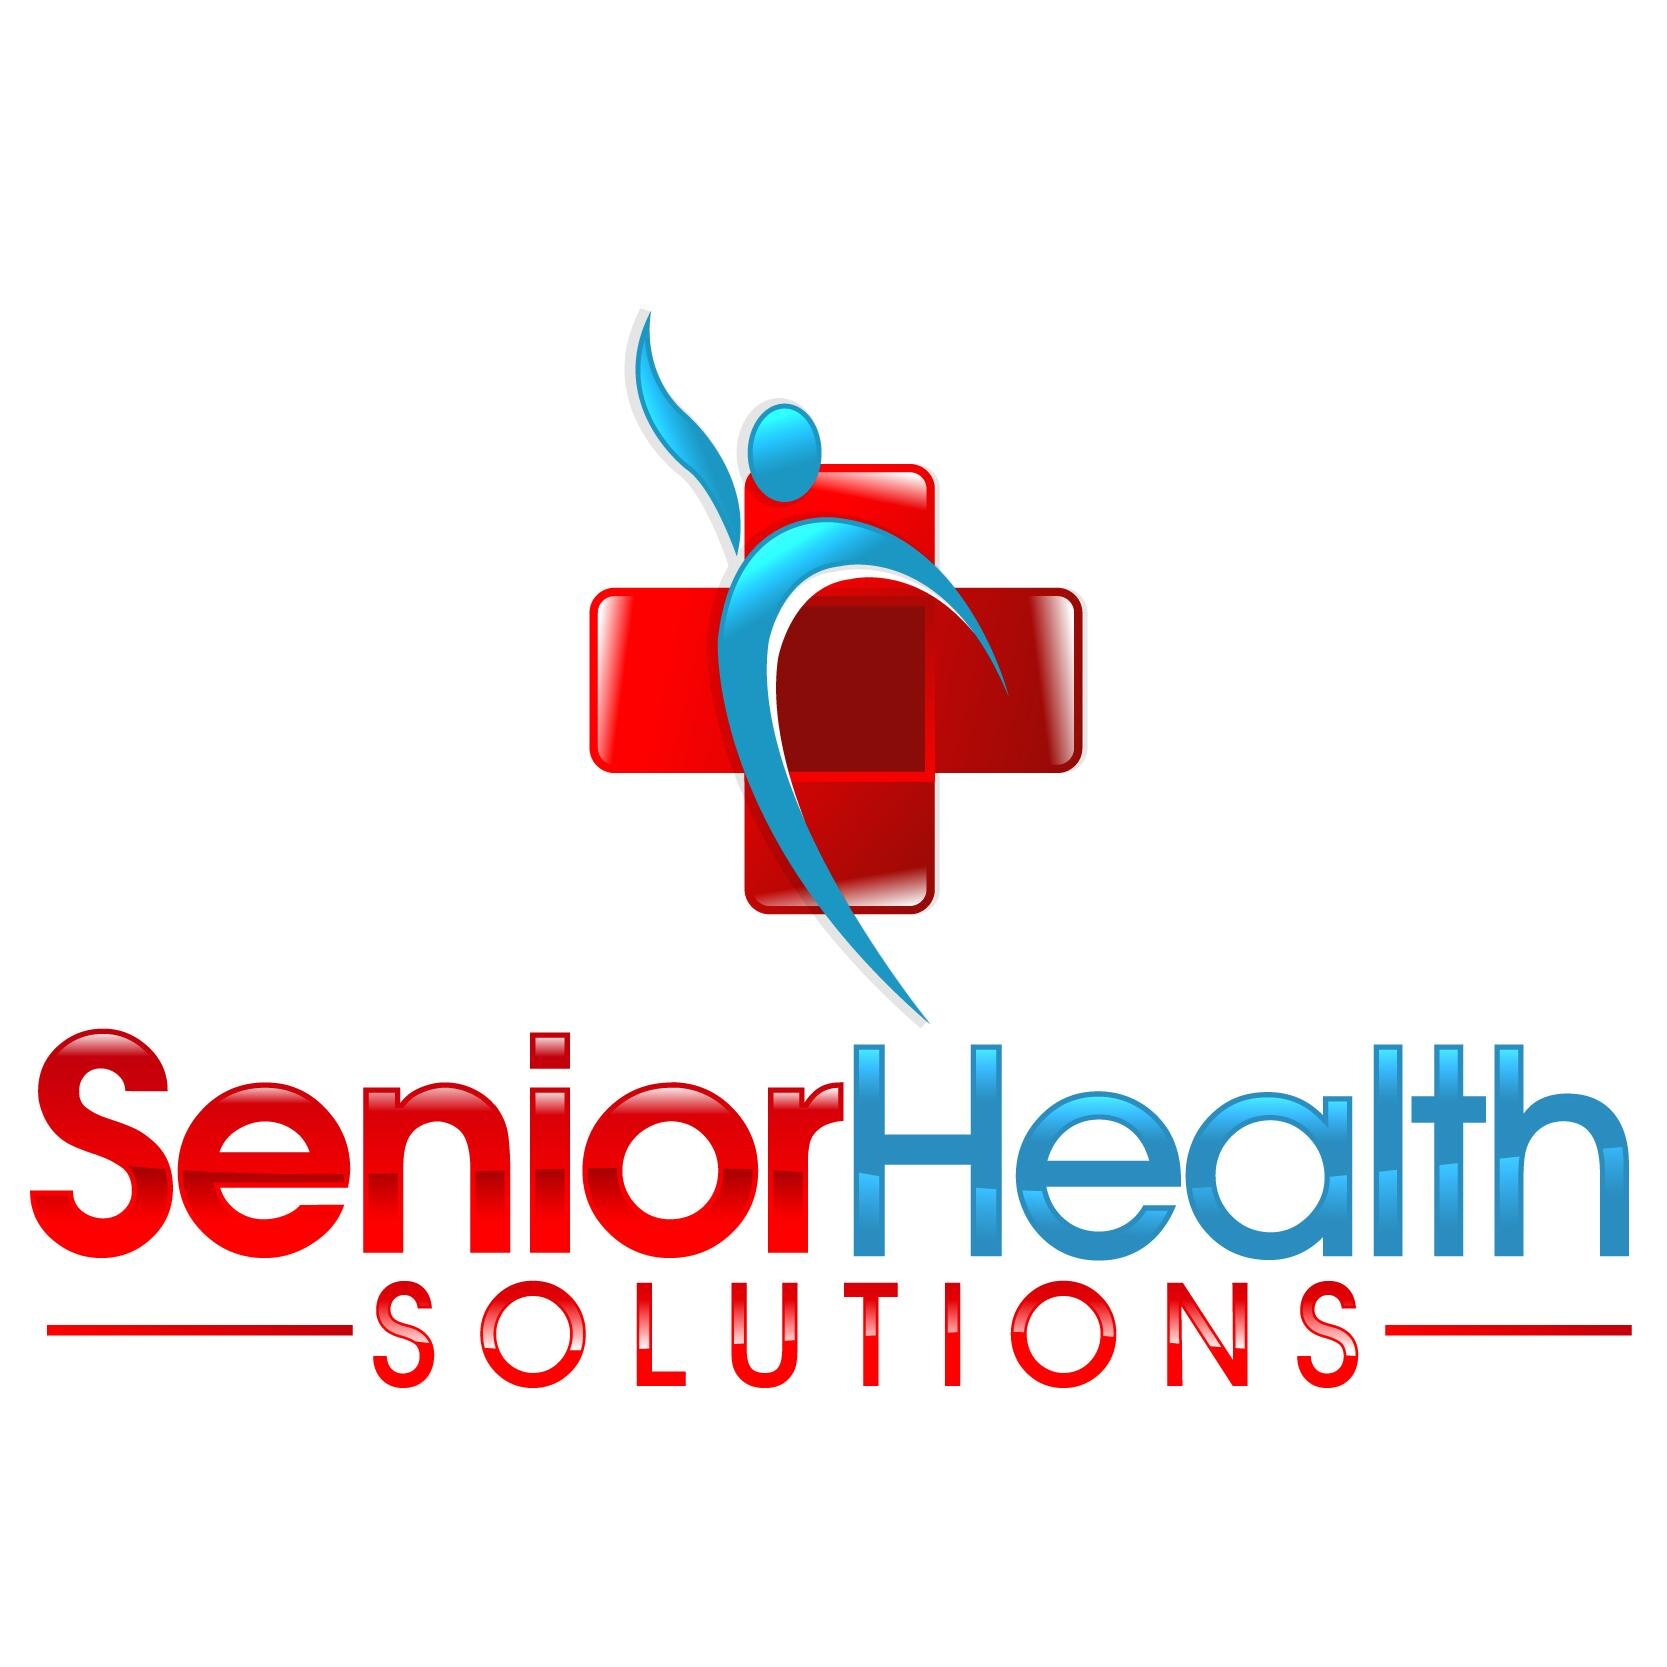 #StLouis, Missouri and Tri-State Area Insurance Specialists Provide Quality Insurance Solutions and Financial Planning Strategies for Seniors.